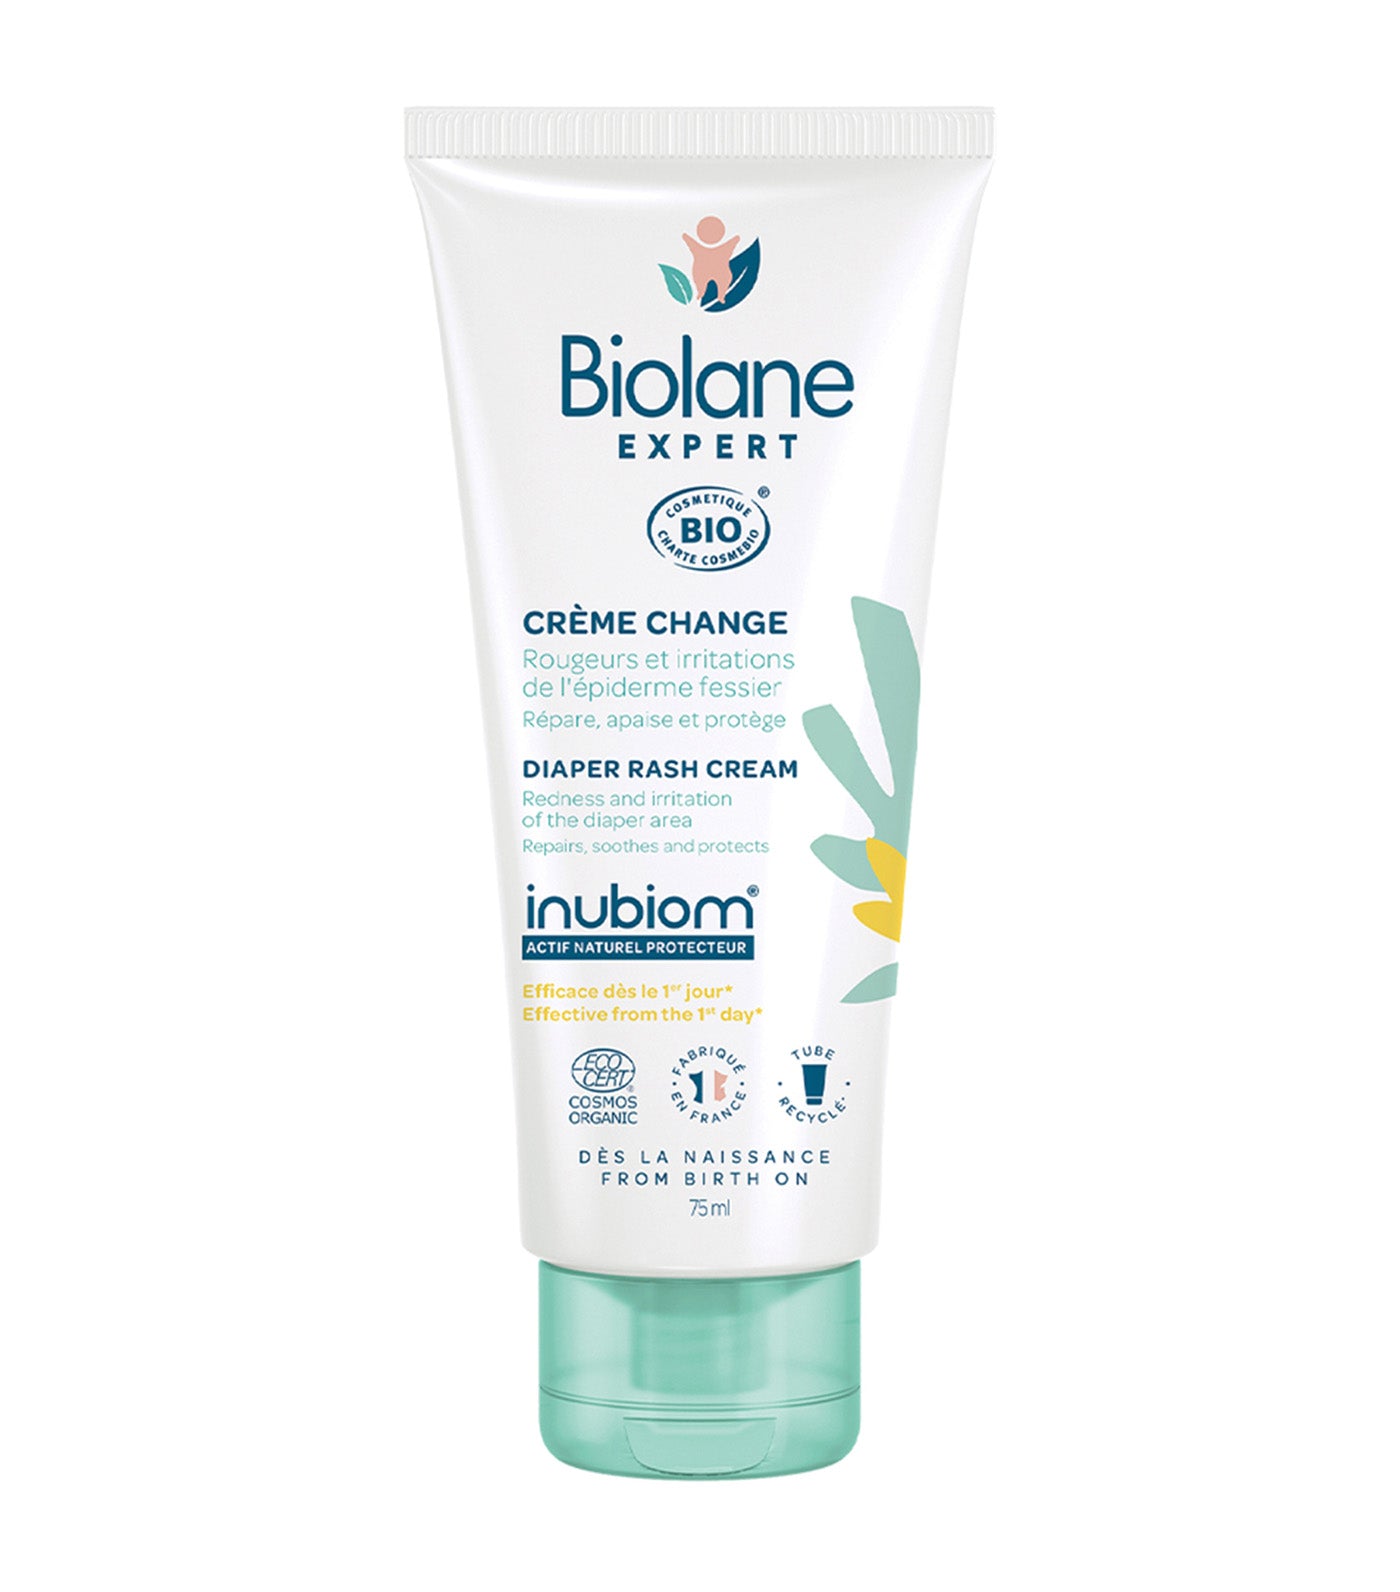 DS Online on Instagram‎: Even your Baby is not alone! Buy 1 Biolane Creme  Change, and get 50% off on Biolane eau de Toilette DM us now  @drugstoreonlinelb or Whatsapp us at